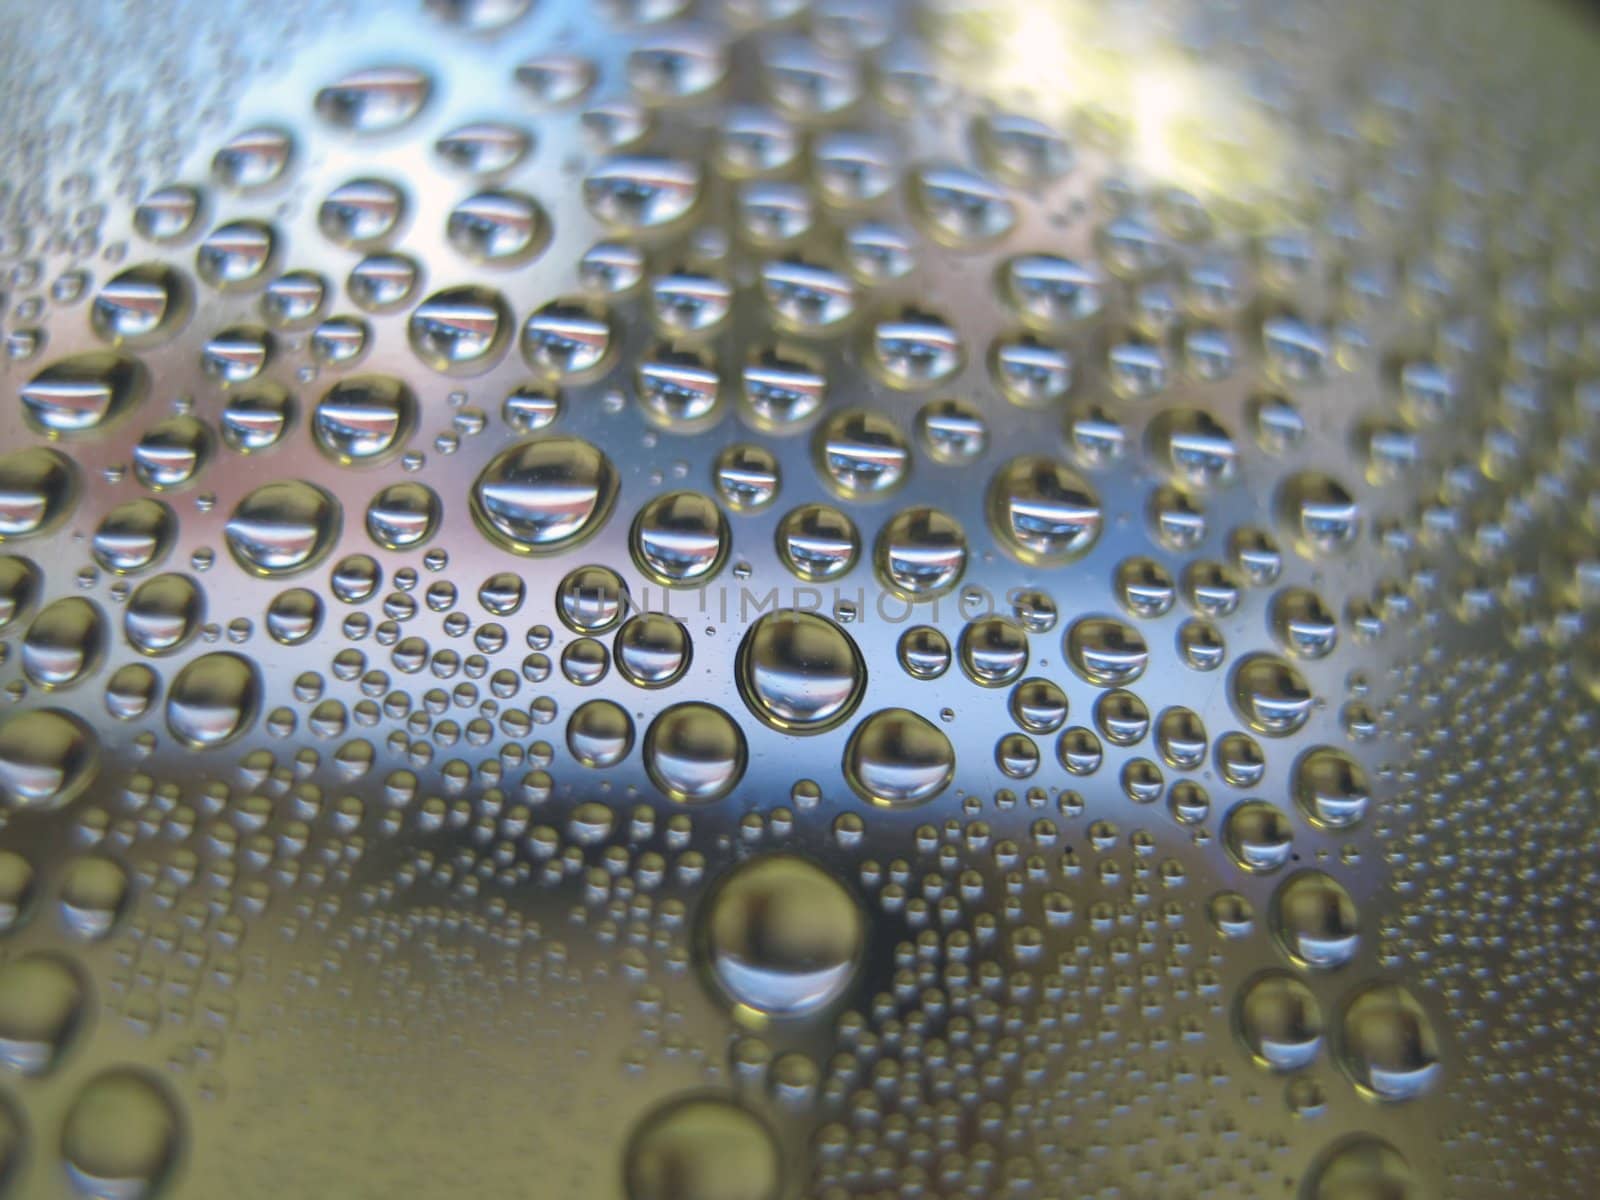 Water drops on the curve transparent surface. Shallow DOF.    by sergpet